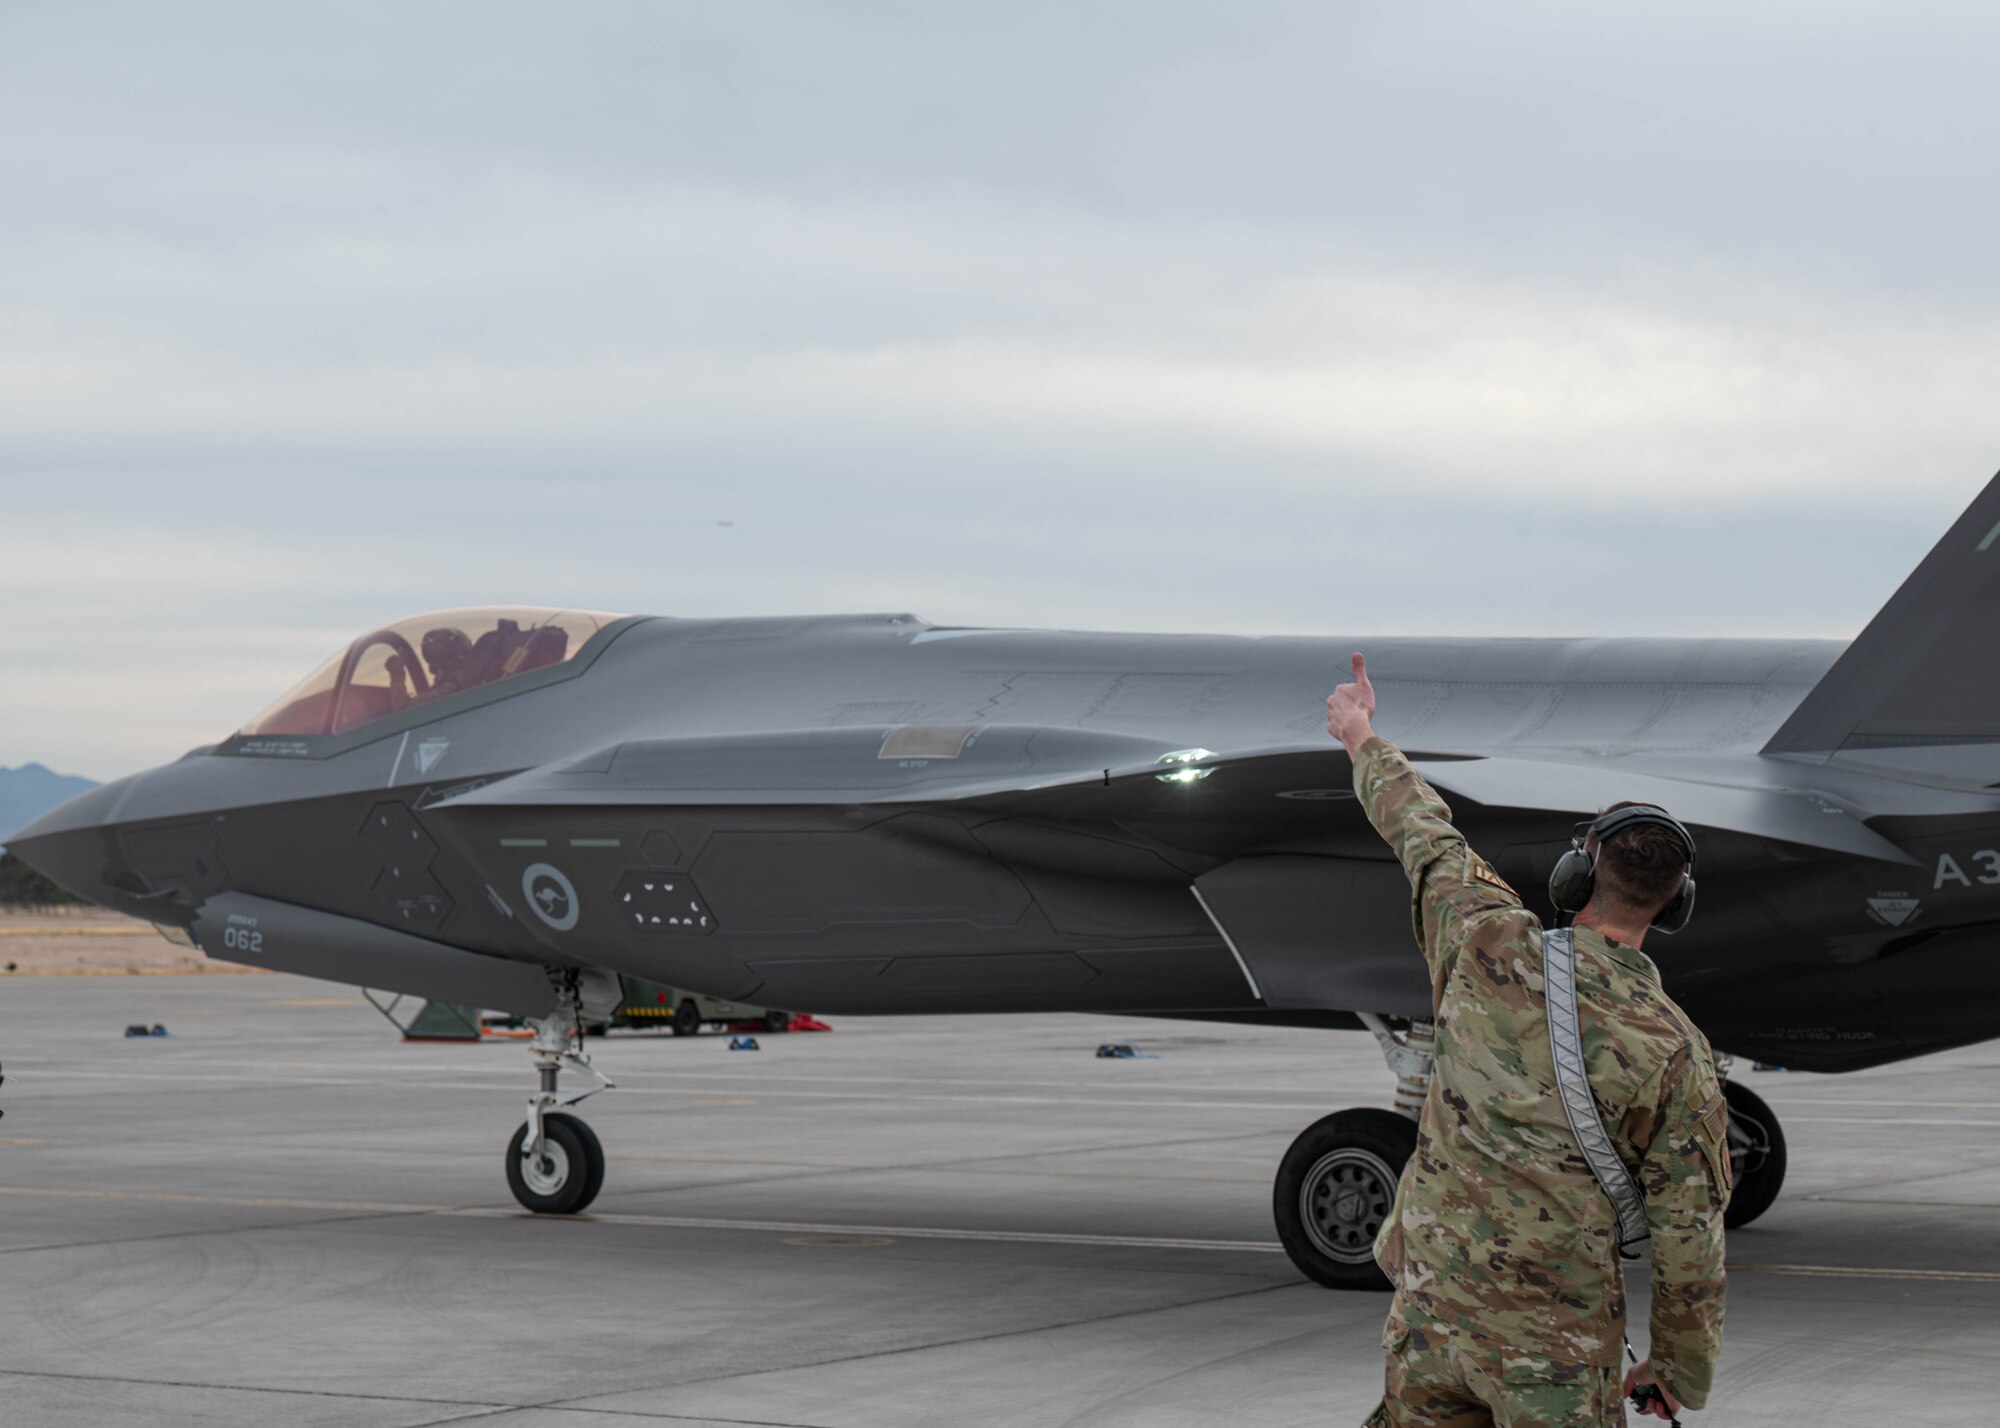 A photo of an F-35 being taxied